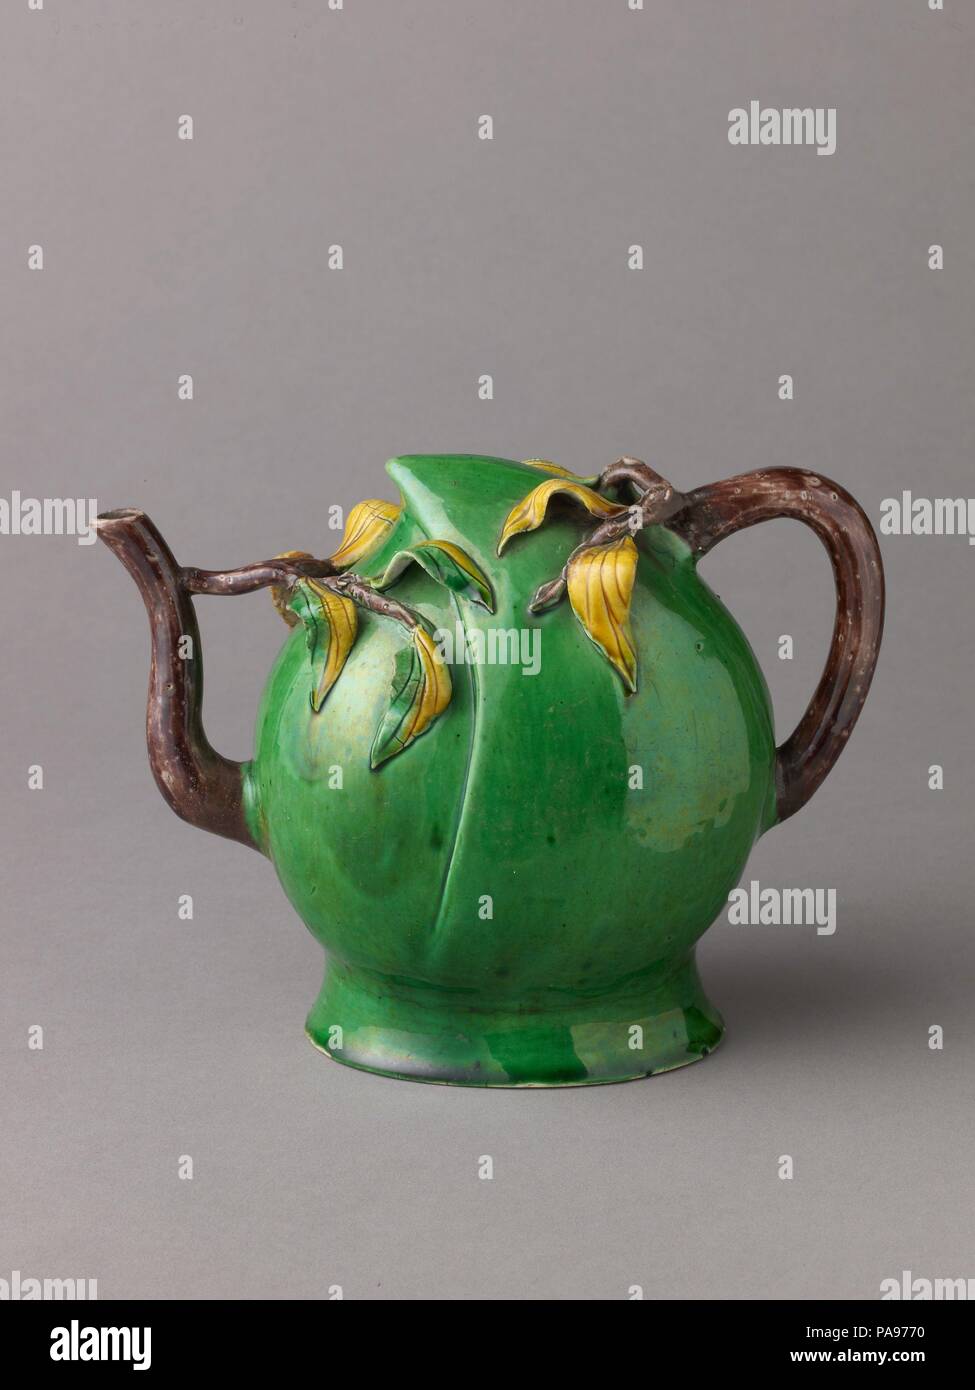 Peach-Shaped Wine Pot or Tea Pot. Artist: Chinese , Qing Dynasty, Later Transitional Period. Culture: Chinese. Dimensions: Height: 12.7 cm.. Date: ca. 1644-83. Museum: Metropolitan Museum of Art, New York, USA. Stock Photo